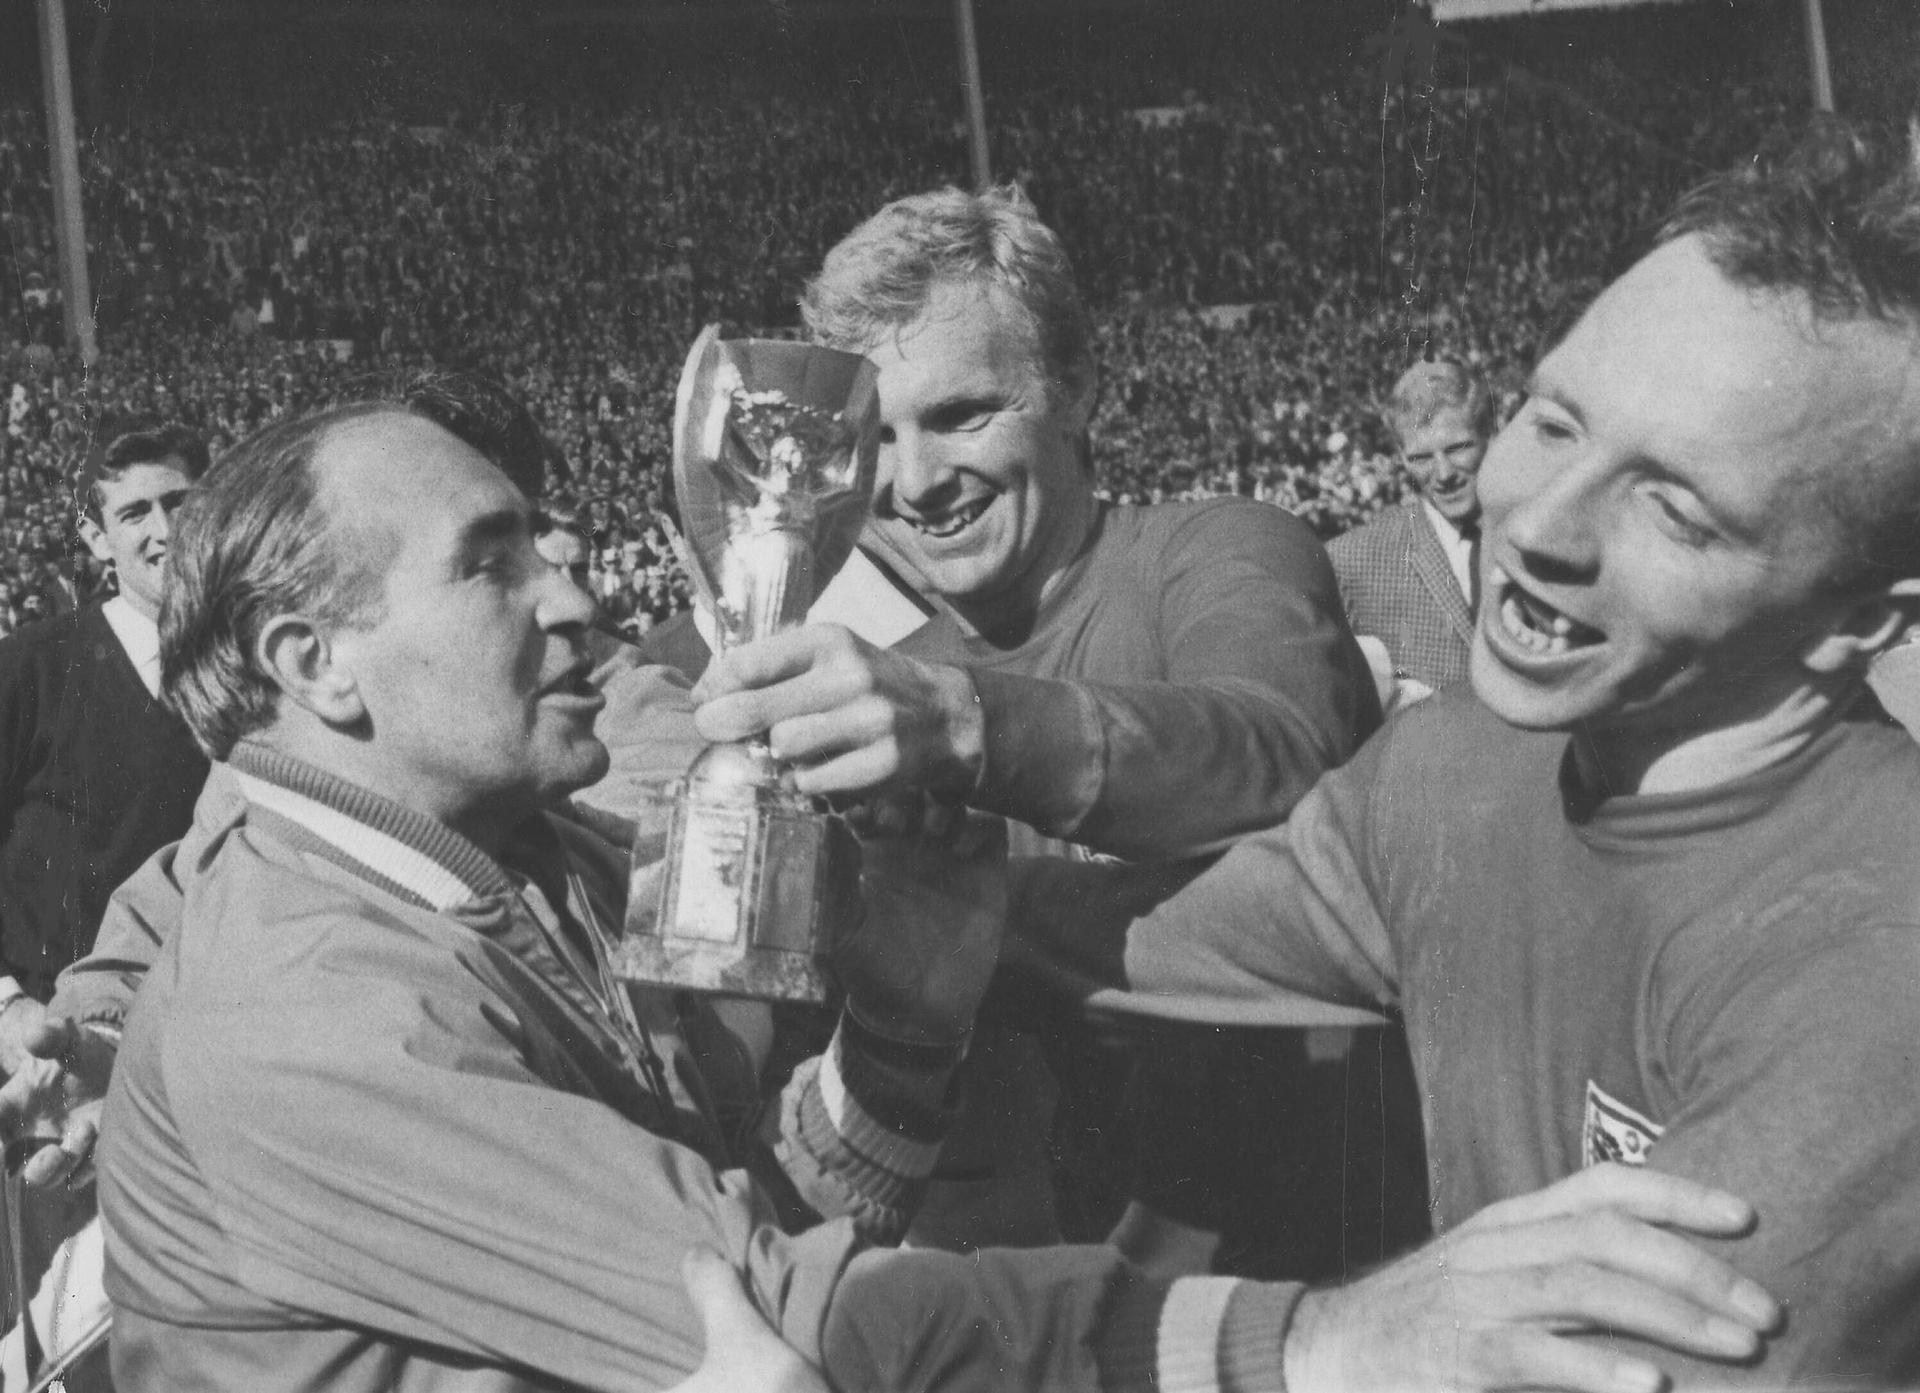 In this July 30, 1966 file photo, England midfield player Nobby Stiles, right, looks at the Jules Rimet Cup, held by England captain Bobby Moore after they had won the World Cup Final at Wembley, London.